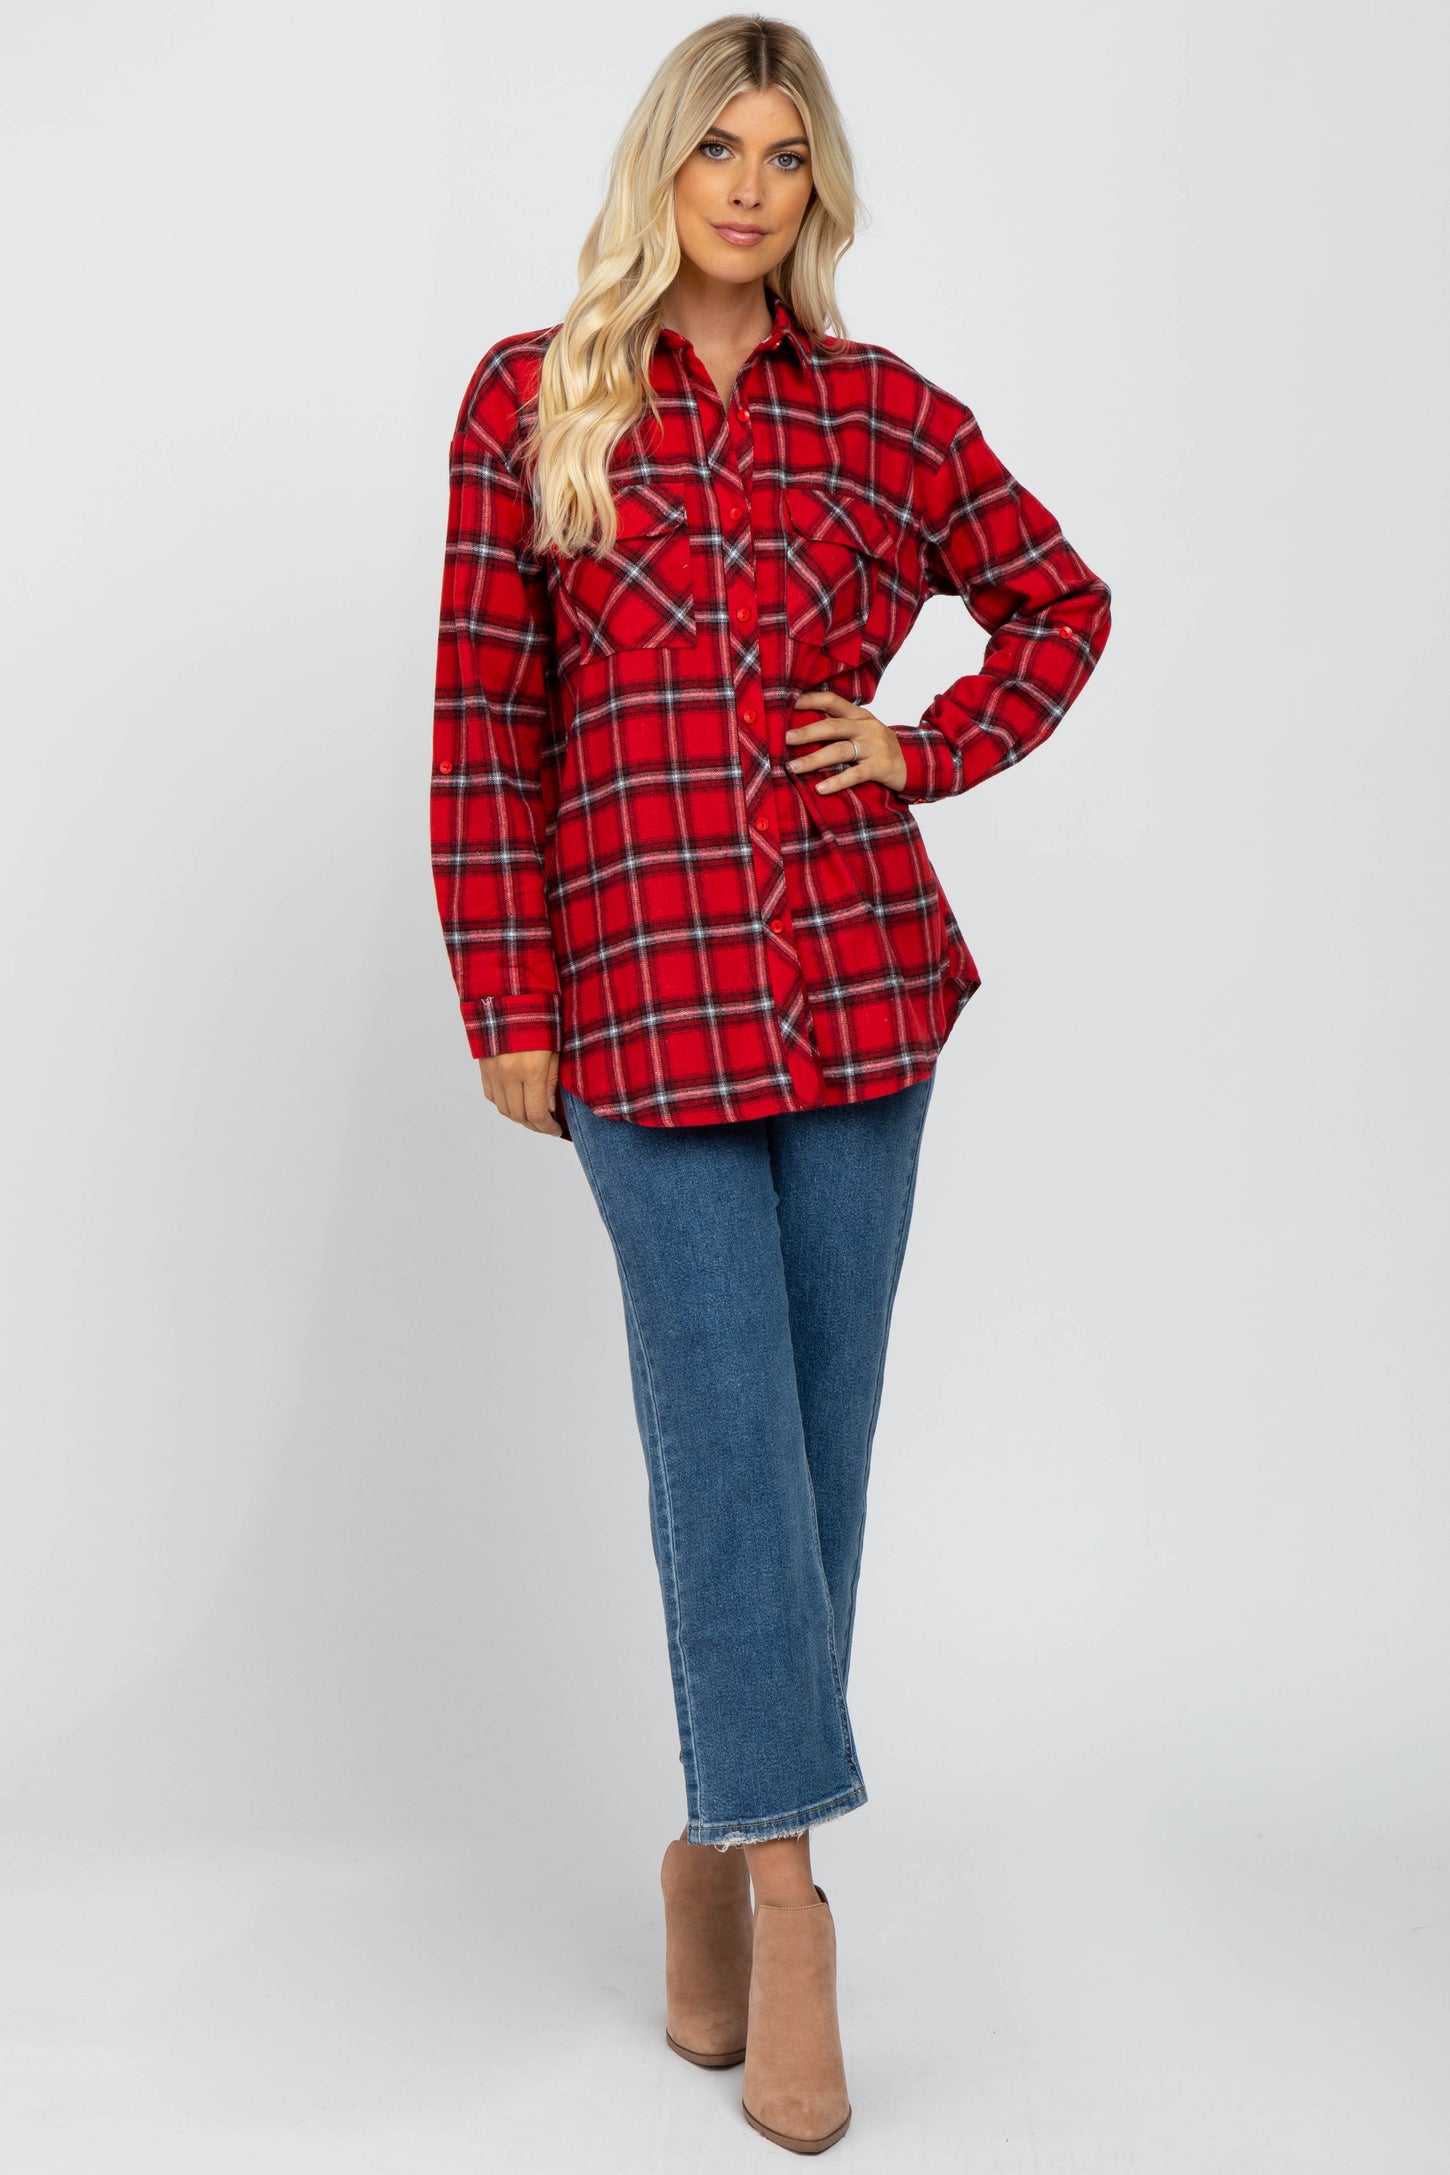 Red Plaid Flannel Top